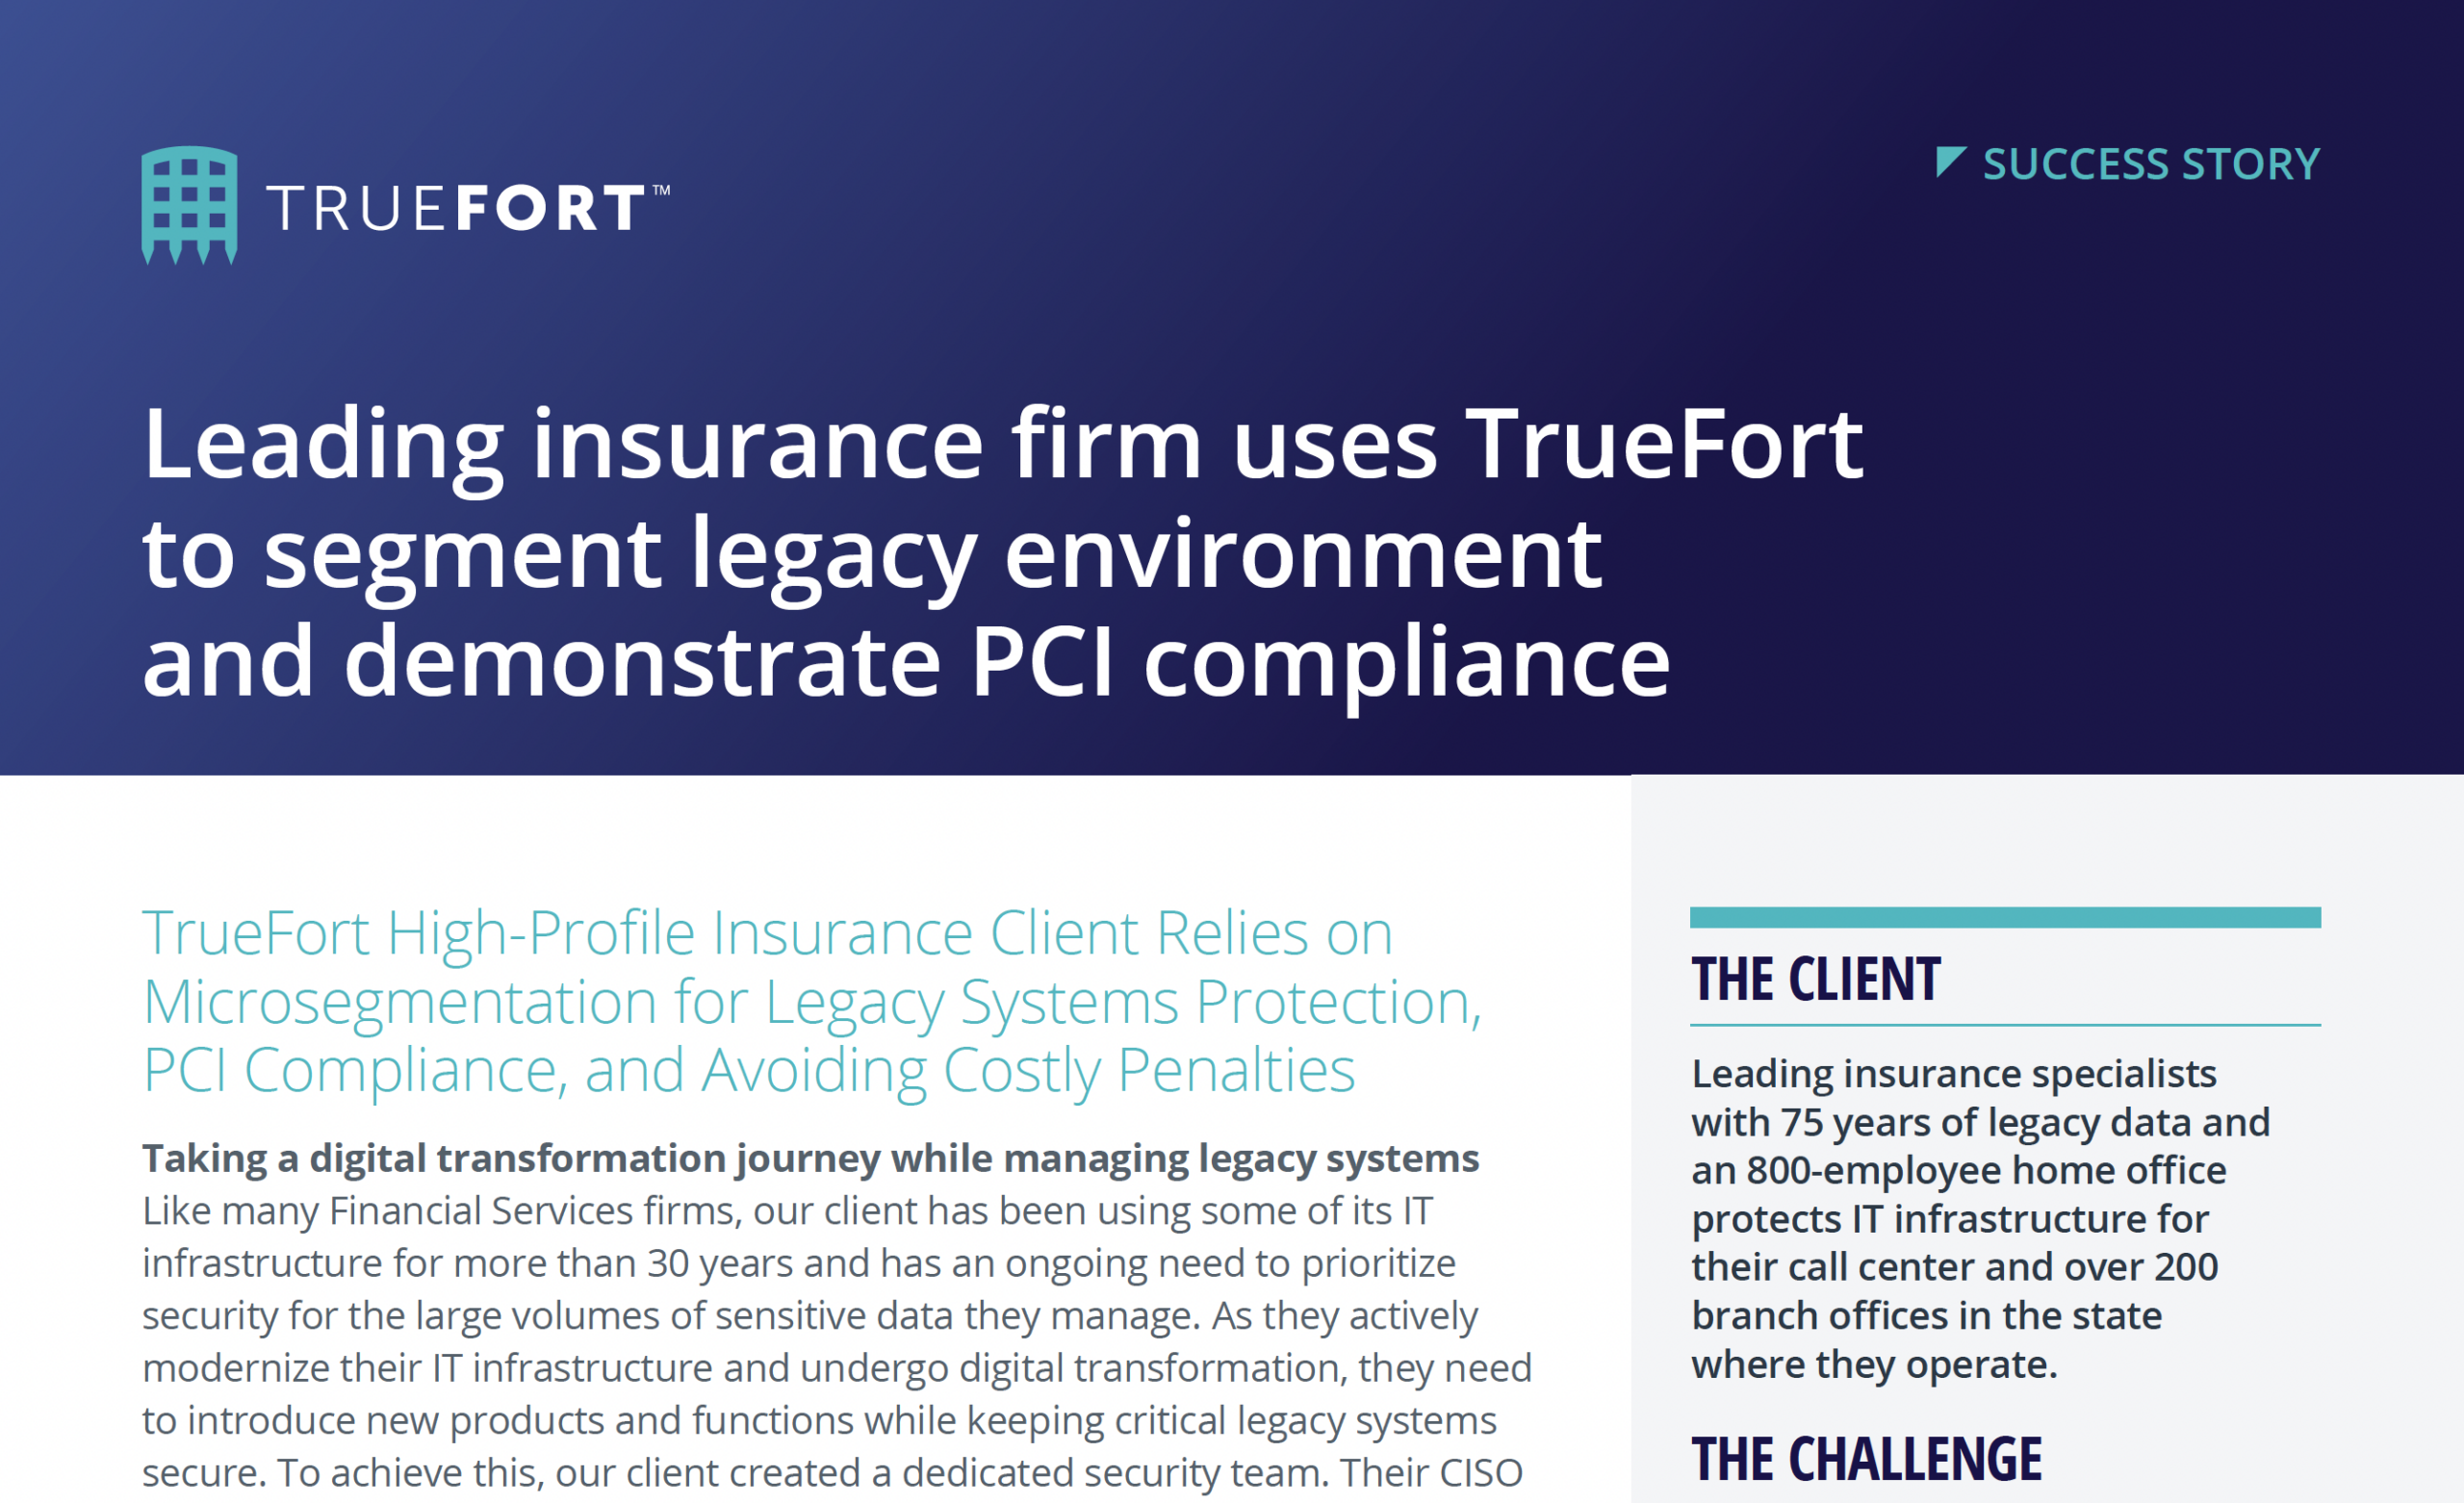 Leading Insurance Firm Uses TrueFort To Segment Legacy Environment And Demonstrate PCI Compliance.